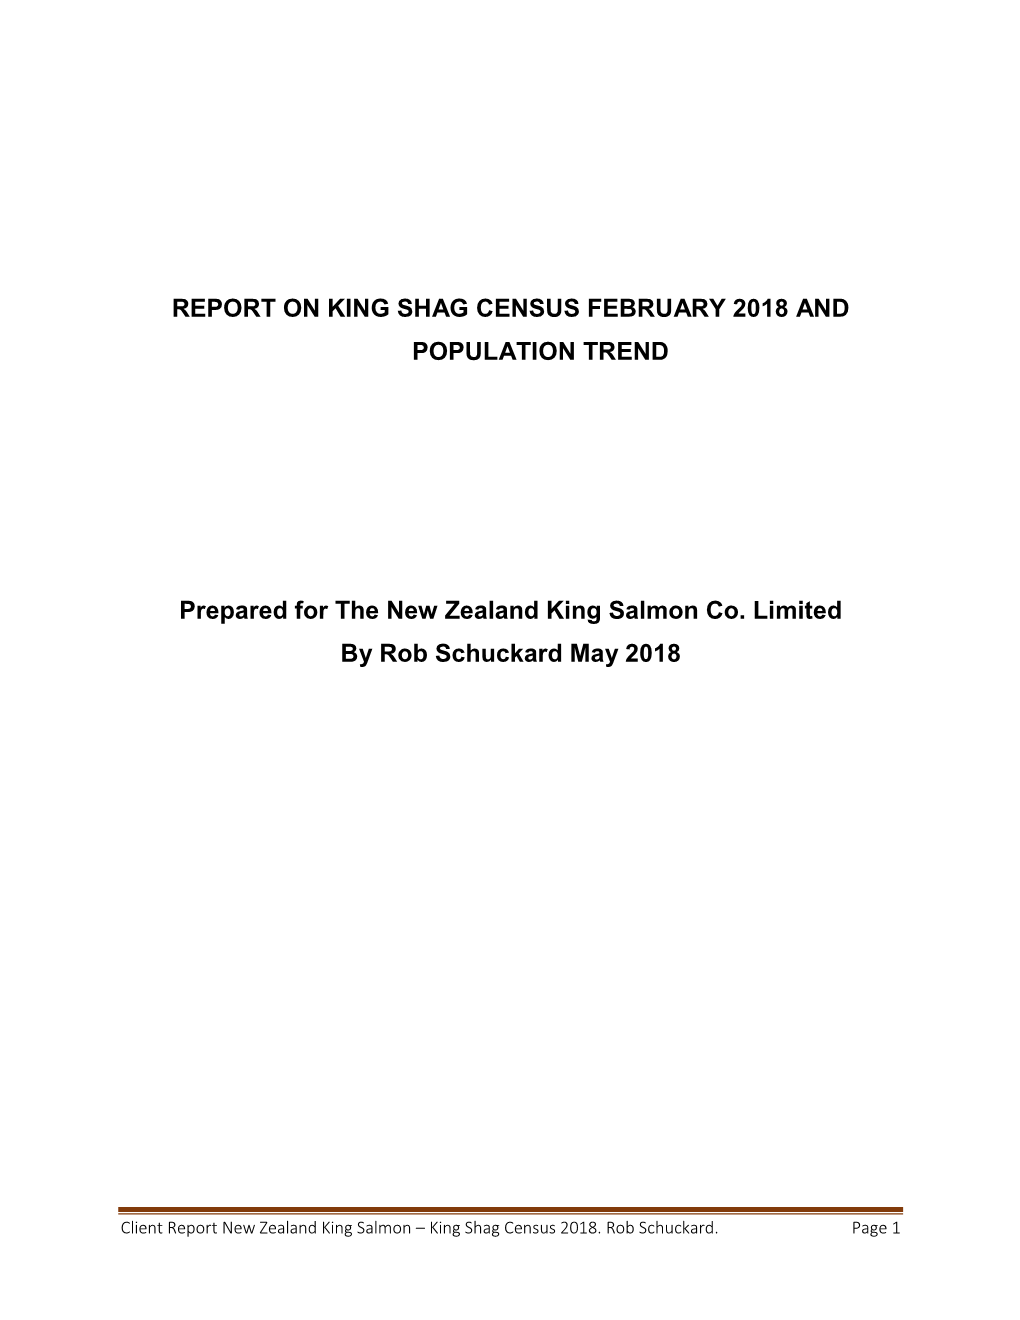 Report on King Shag Census February 2018 and Population Trend